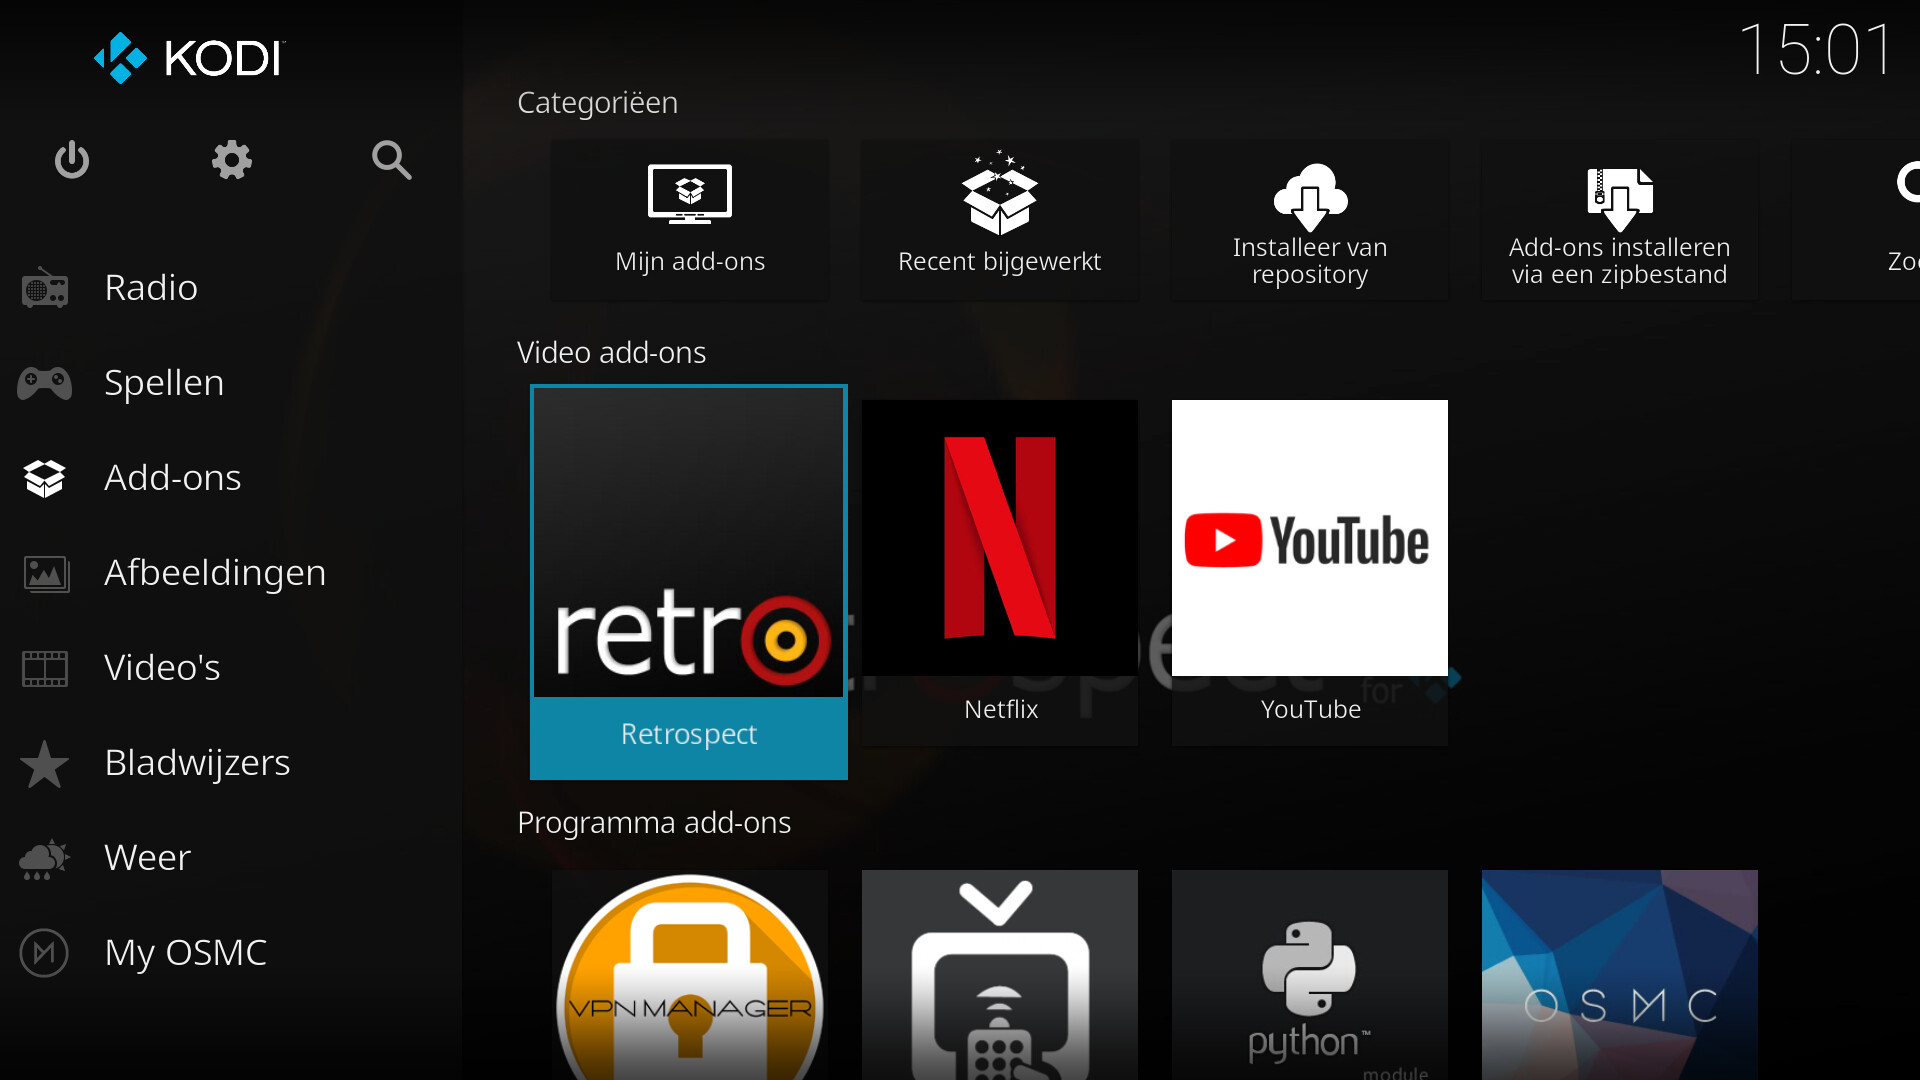 Check if the addons are missing or replaced:
Launch Kodi and navigate to the Add-ons section.